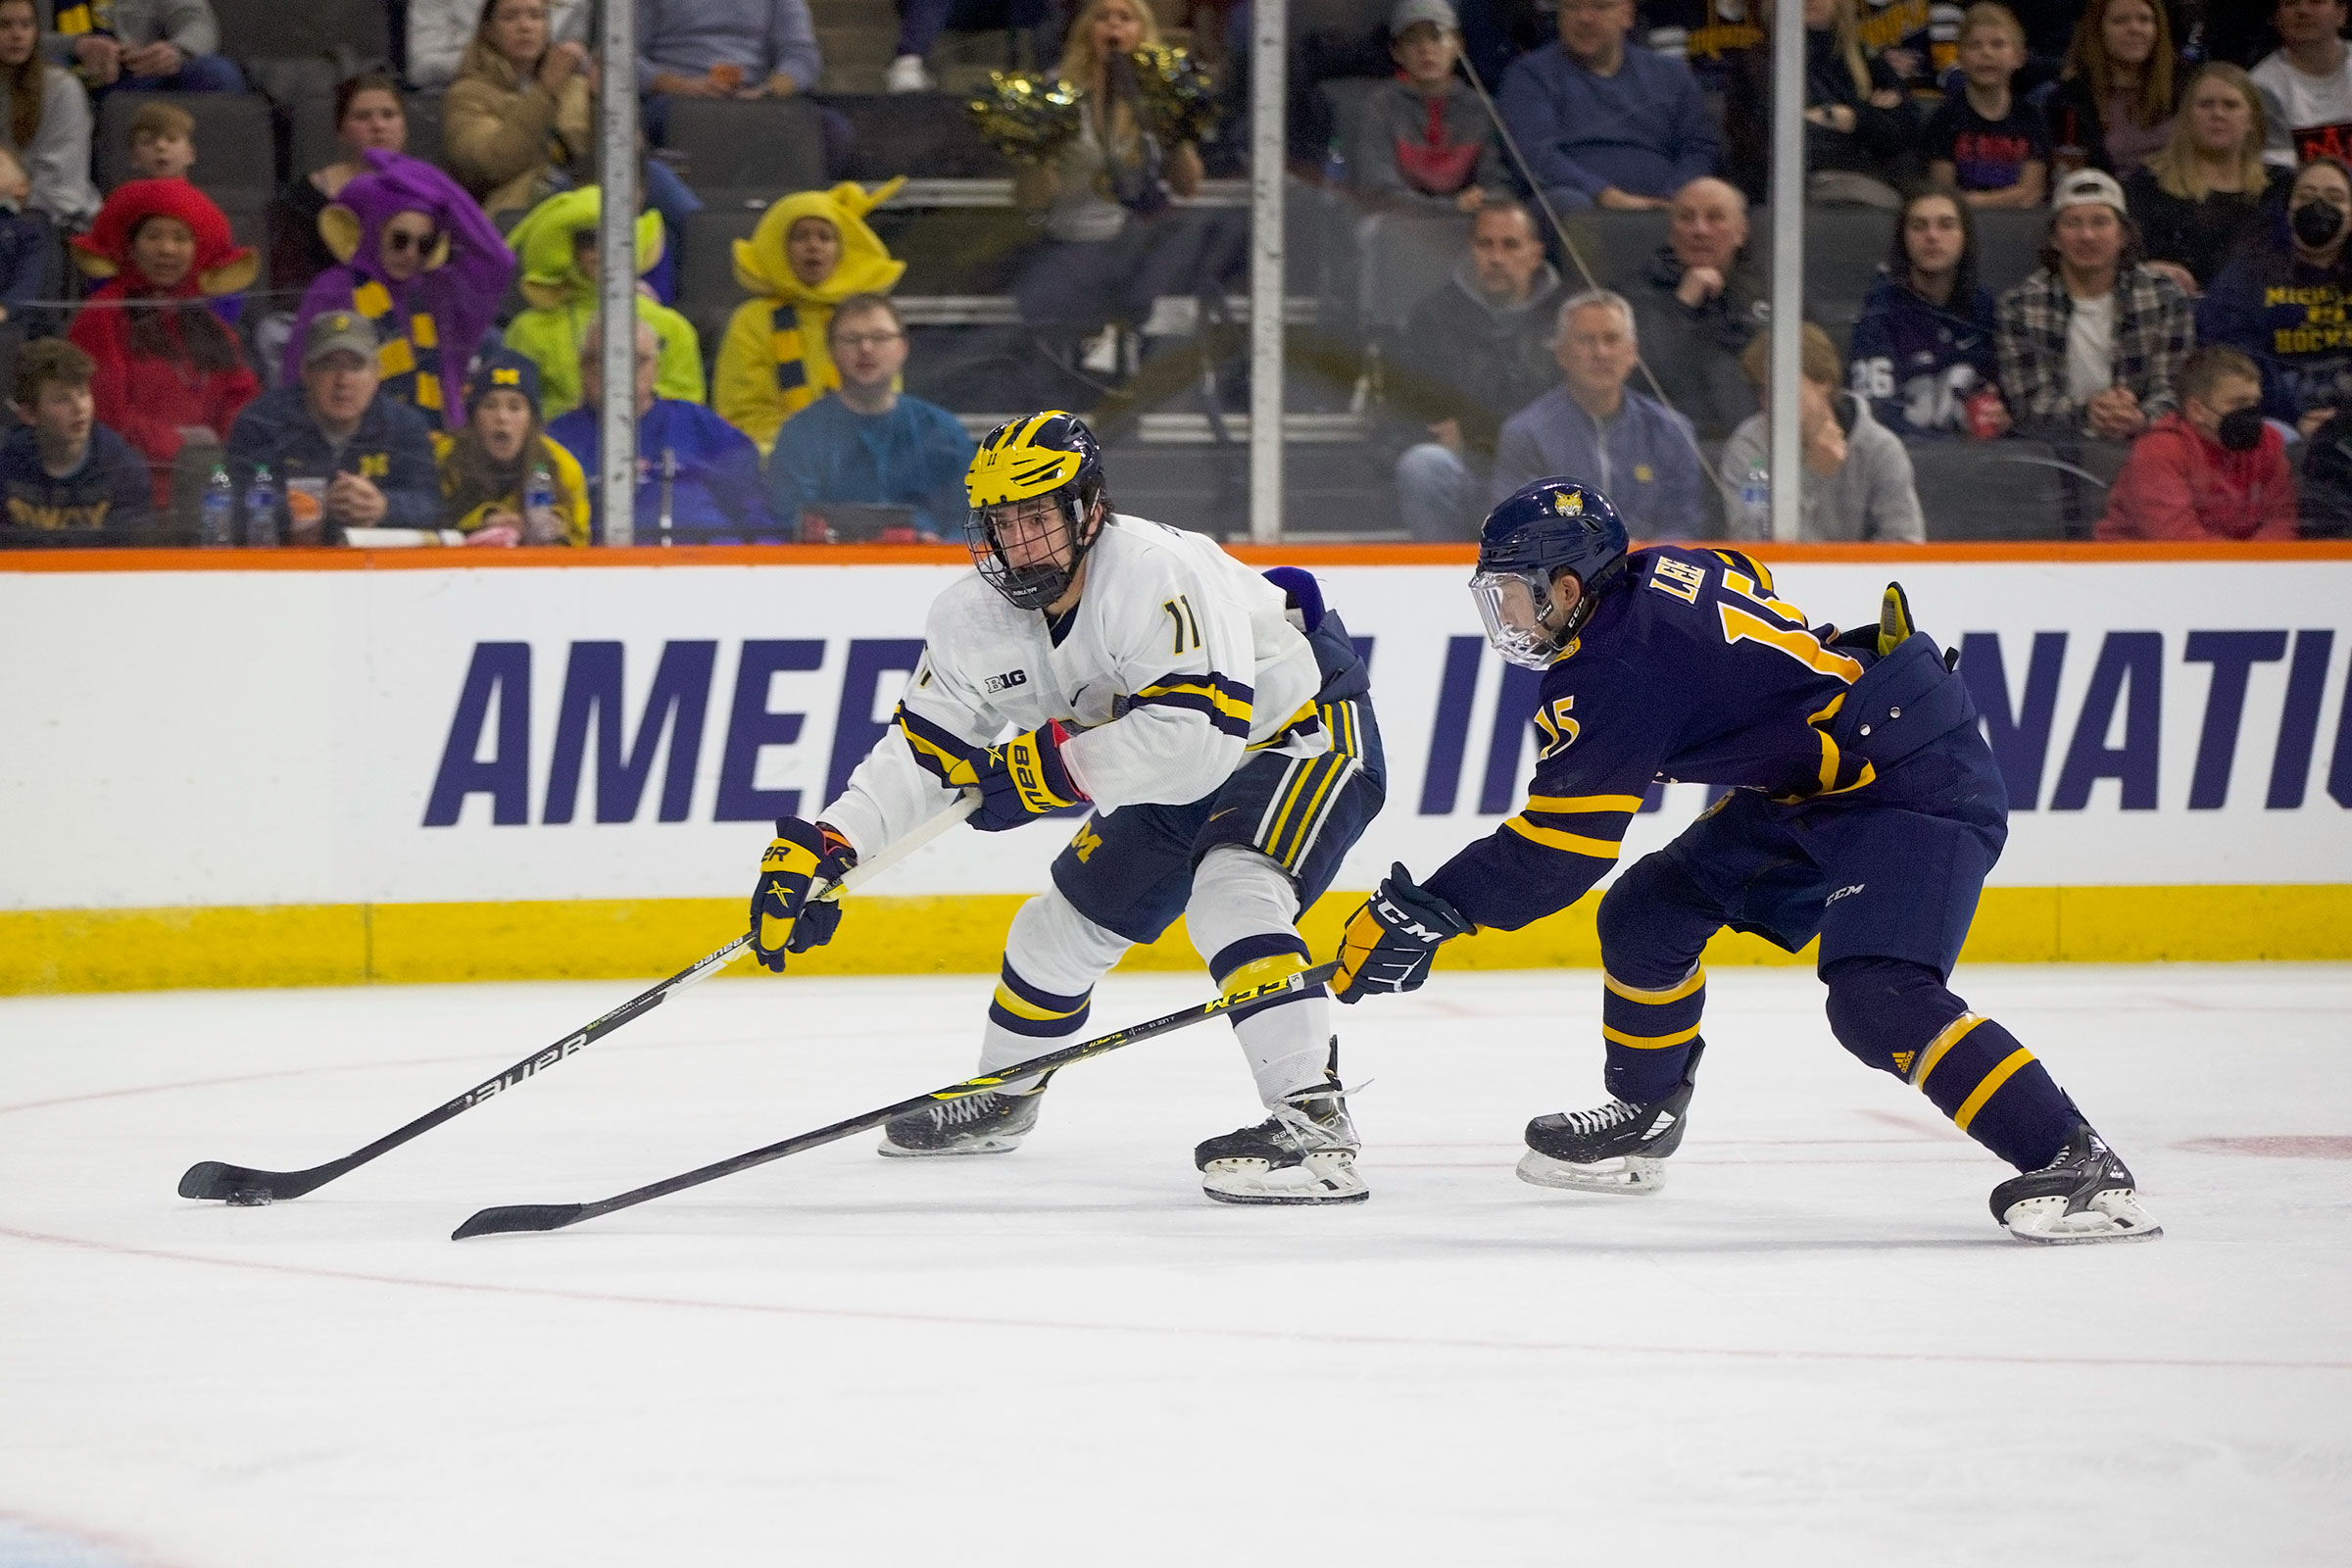 Seven Michigan skaters named to World Junior evaluation camp